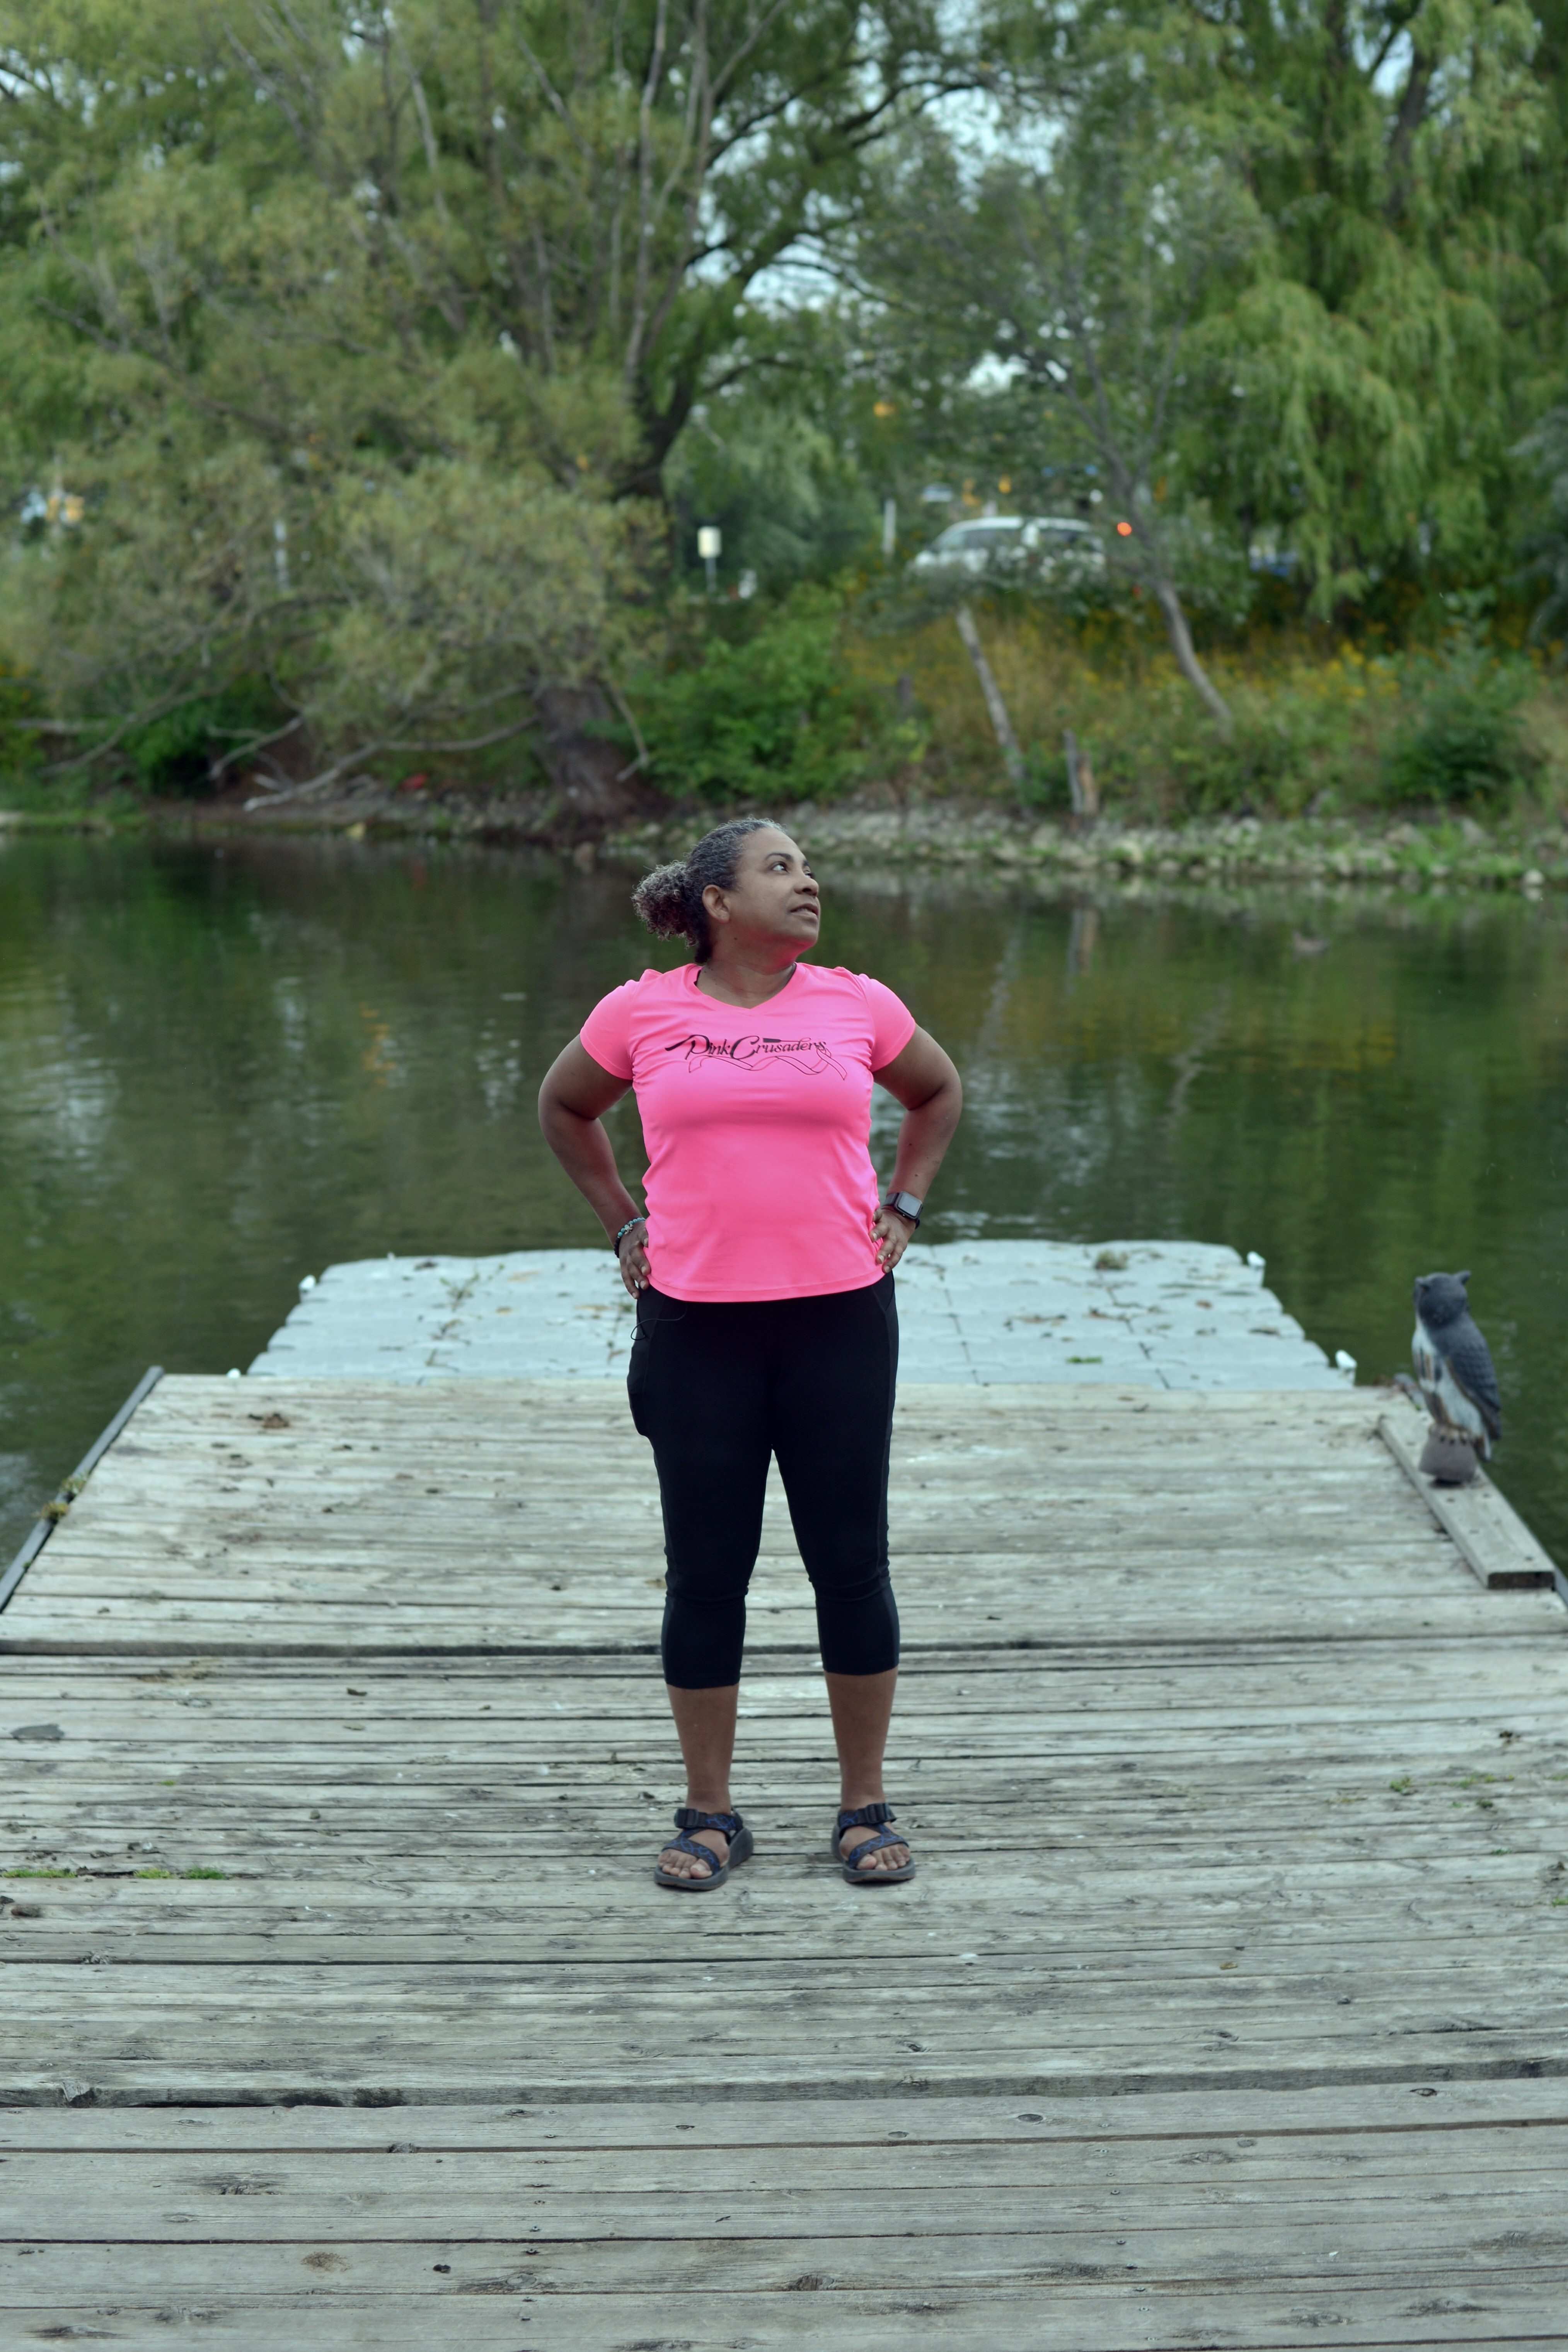 A woman stands on a dock in a lake